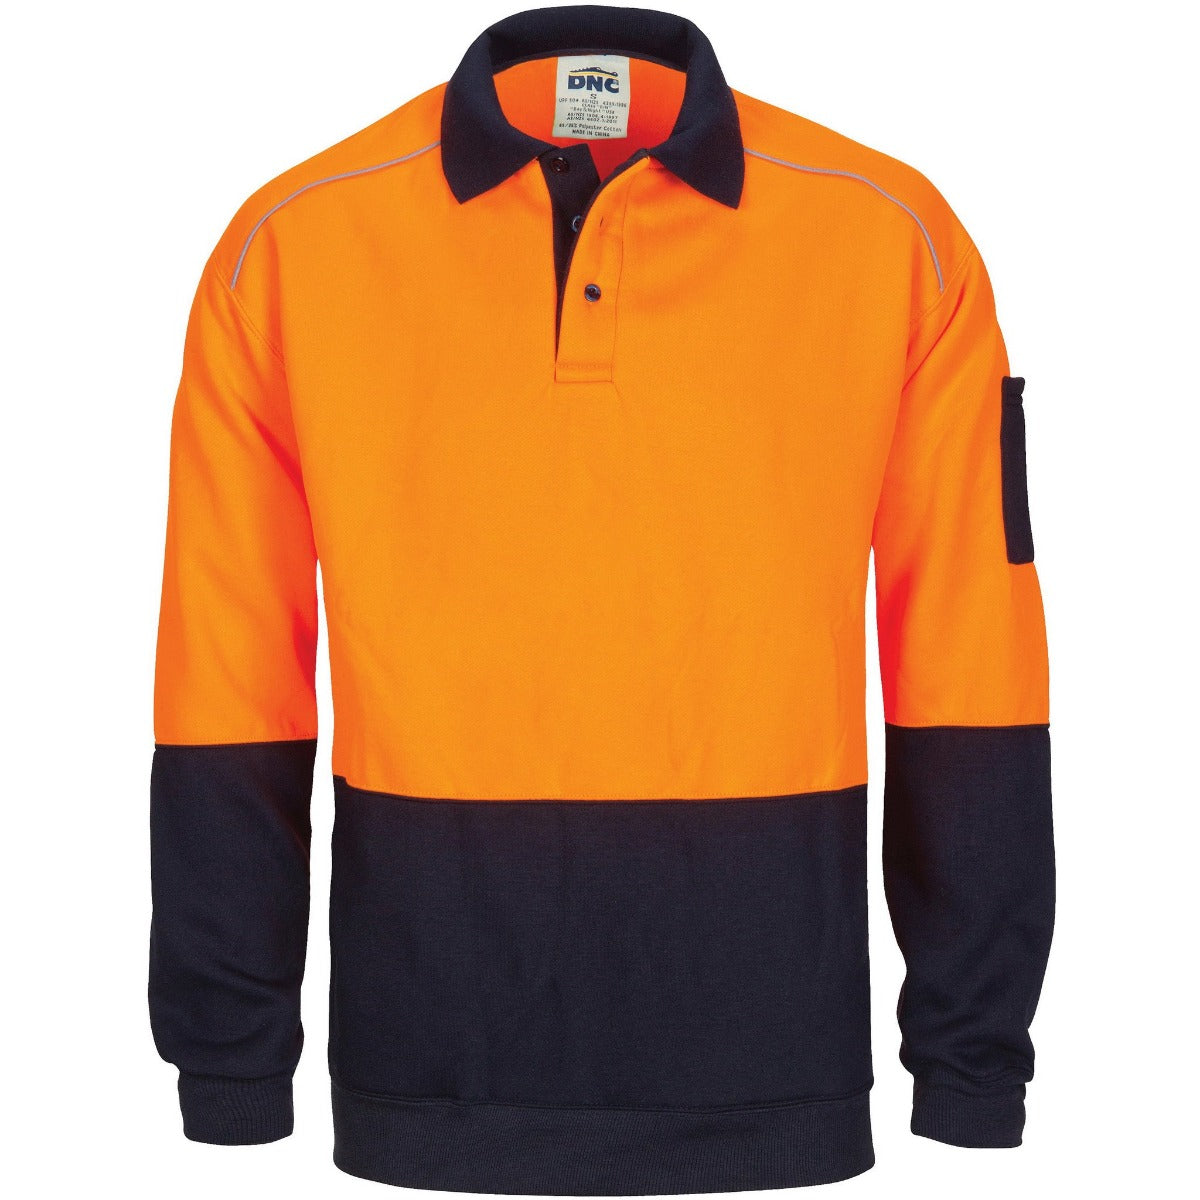 Dnc Hivis Rugby Top Windcheater With Two Side Zipped Pockets (3727) - Star Uniforms Australia